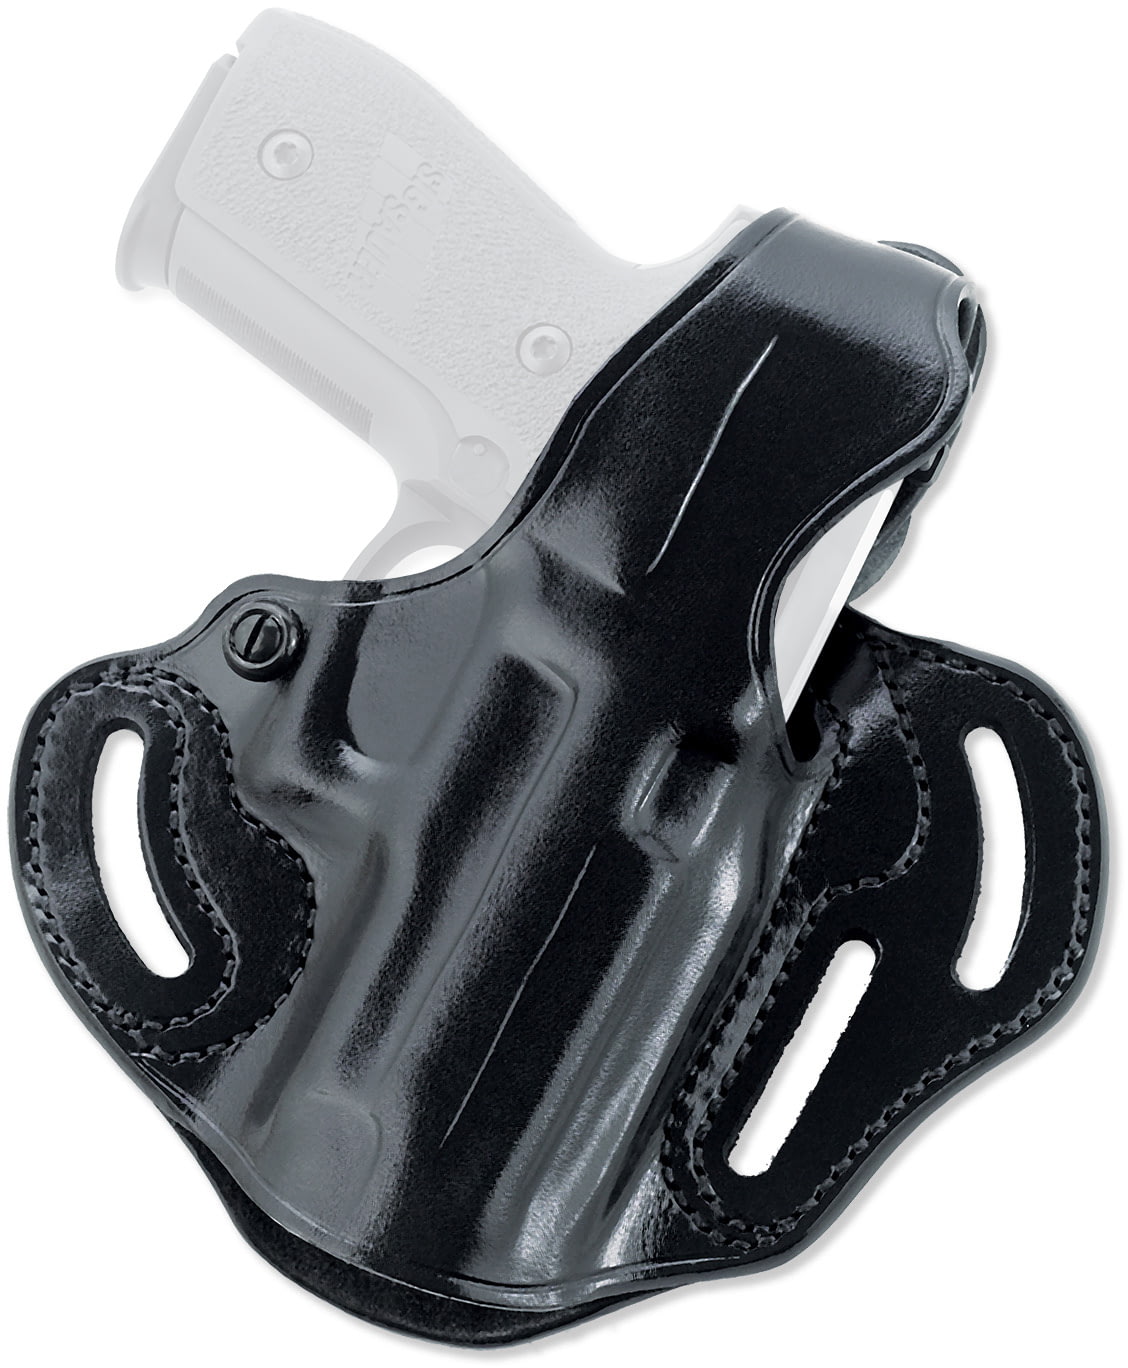 Galco Cop 3 Slot Strongside/Crossdraw Belt Holster SIG-SAUER P228 SIG: CTS250B